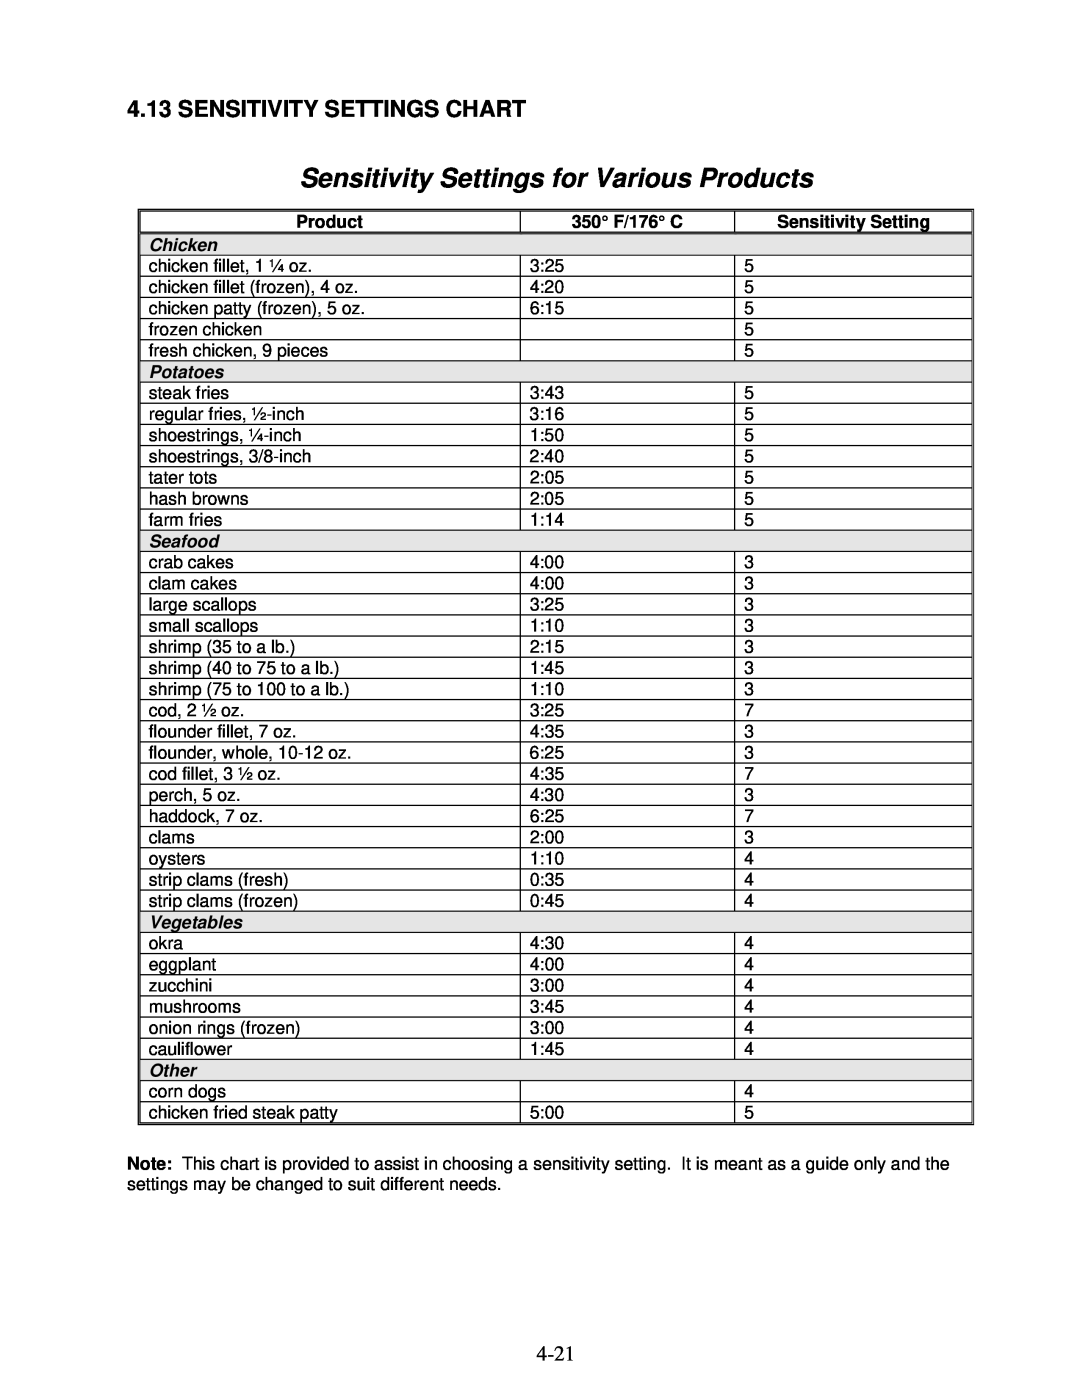 Frymaster Protector Series Sensitivity Settings Chart, Sensitivity Settings for Various Products, 350 F/176 C, Chicken 